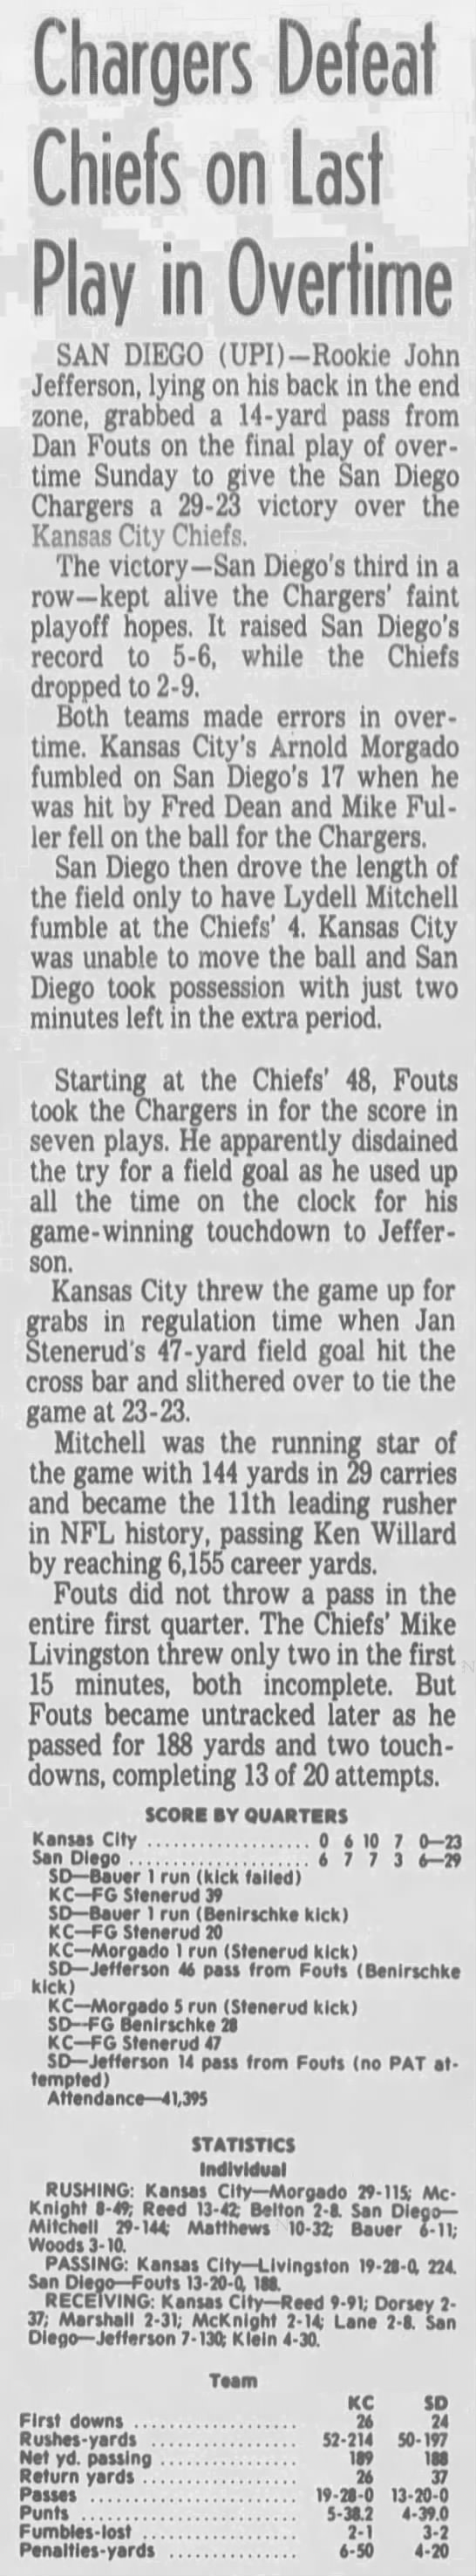 Chargers 29-23 Chiefs, 13 Nov 1978 - 